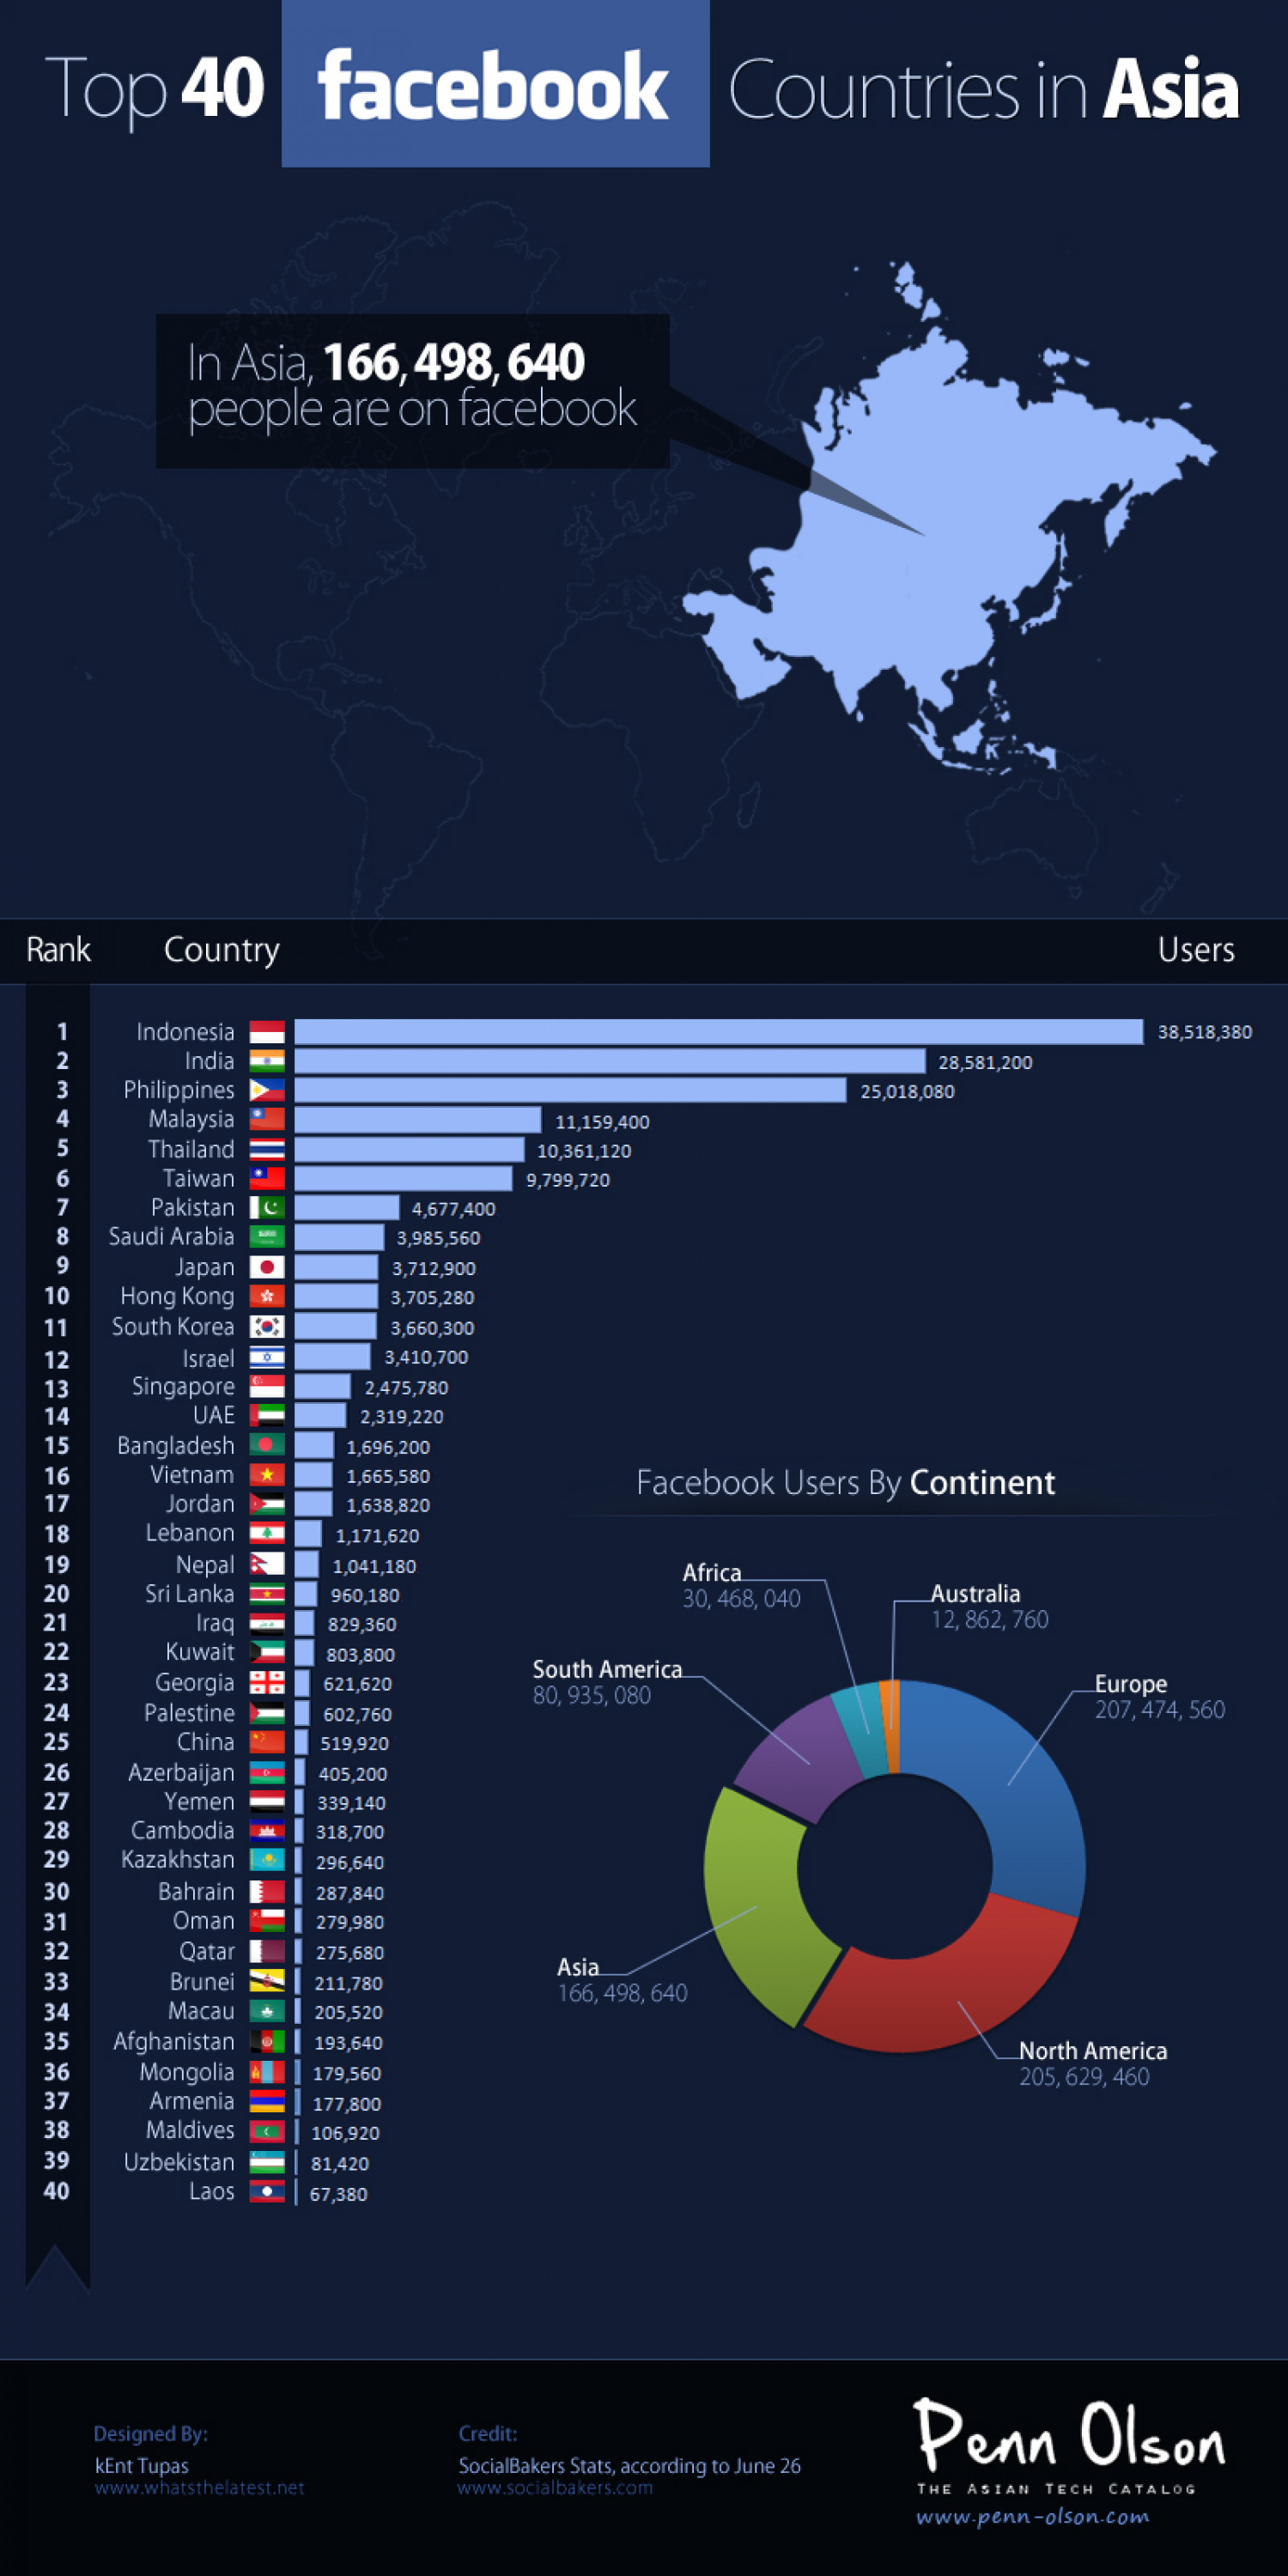 Top 40 Facebook Countries in Asia Infographic